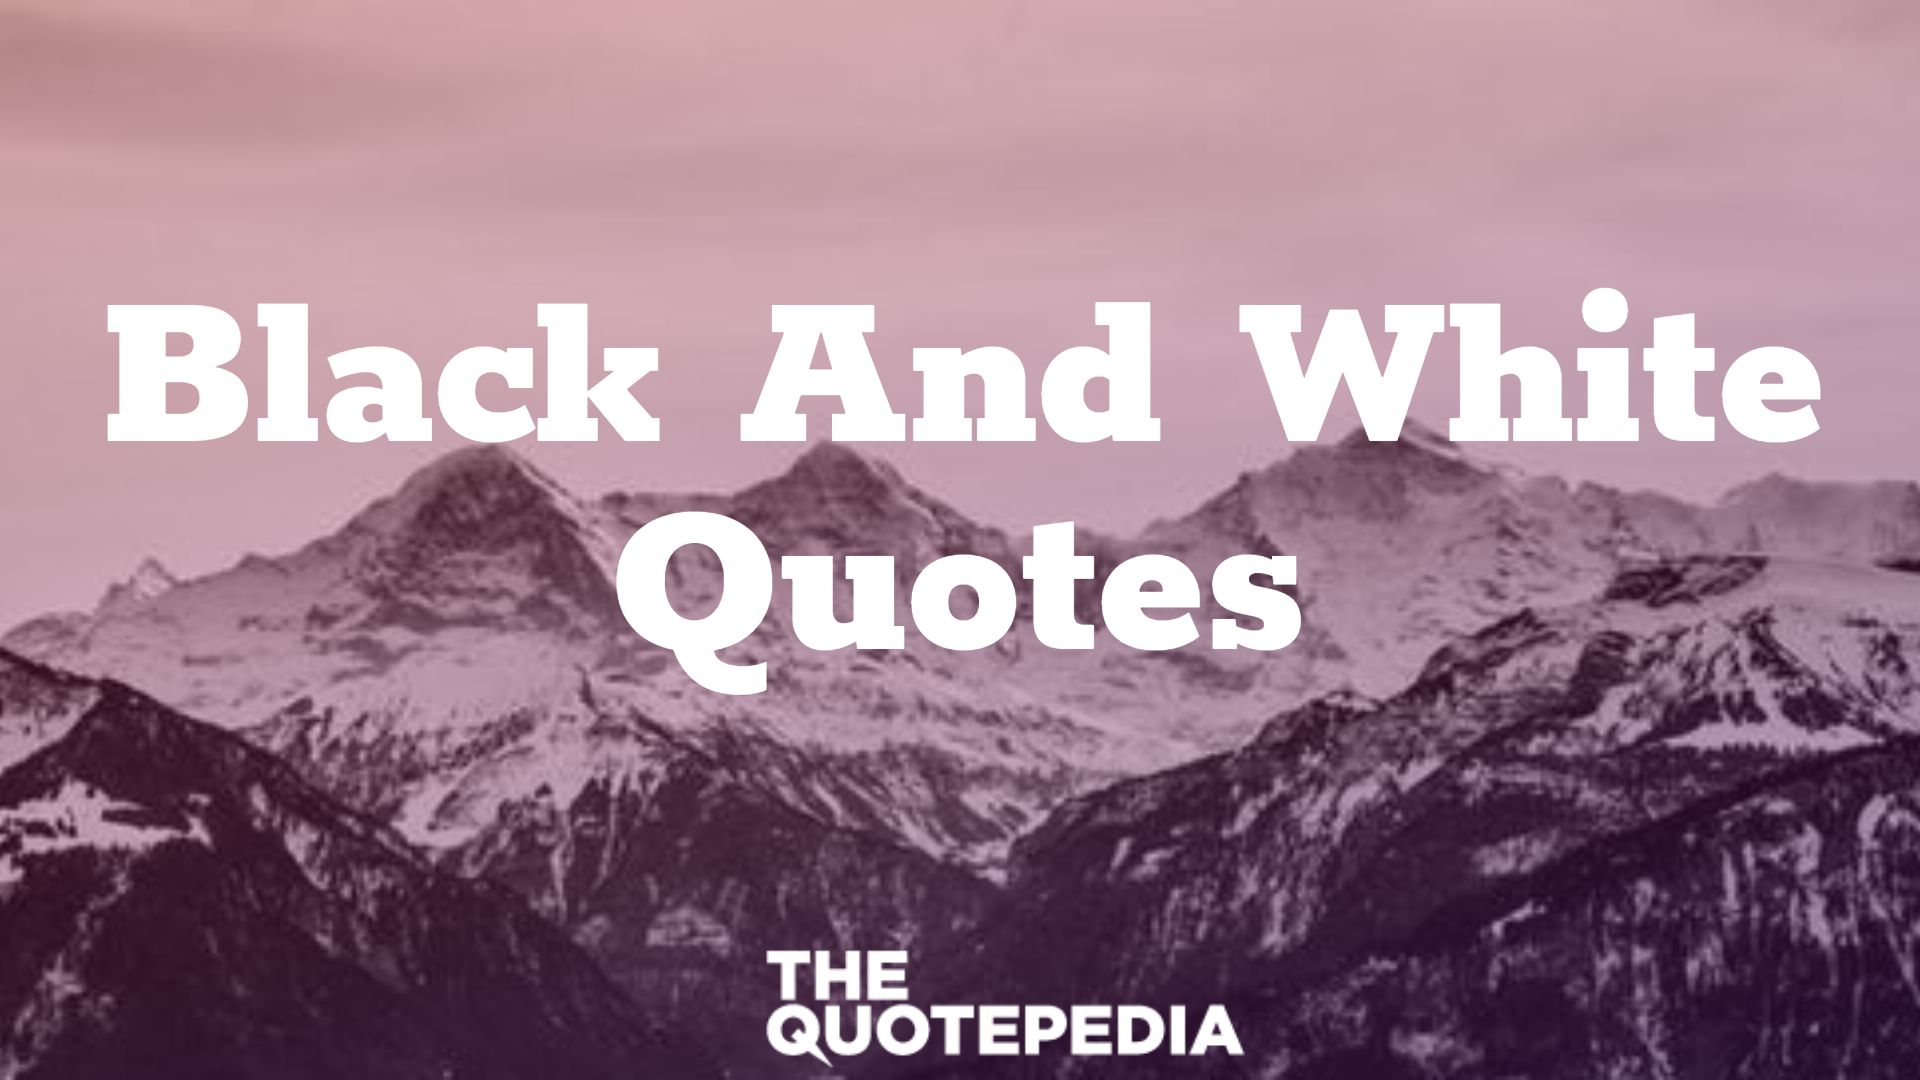 Black And White Quotes